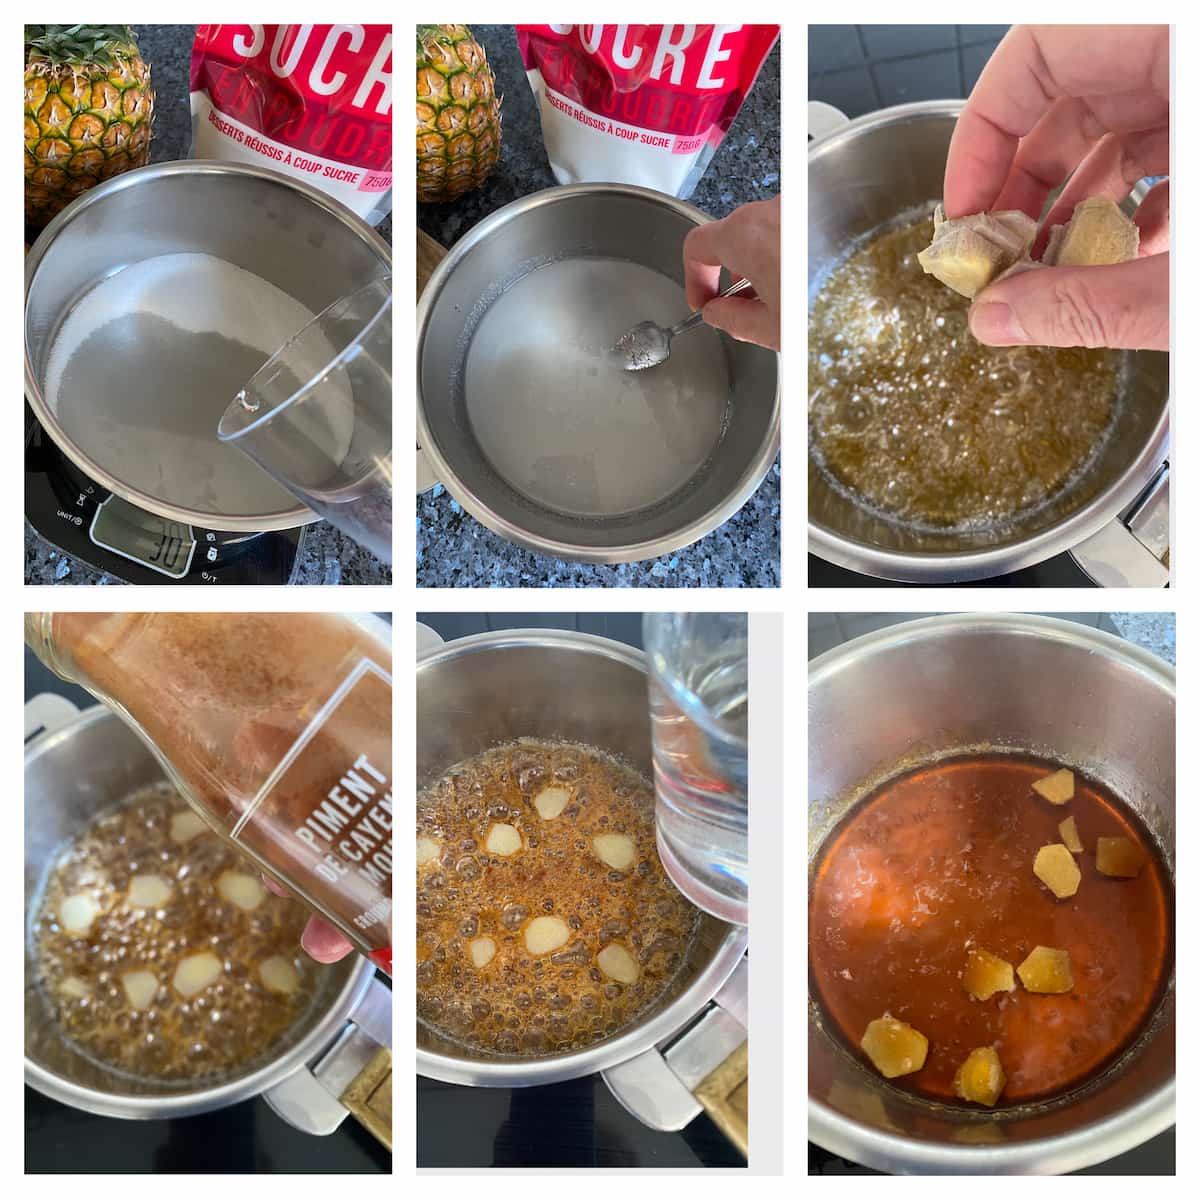 6 steps making a wet caramel with sugar and water then adding slices of ginger, chilli and water